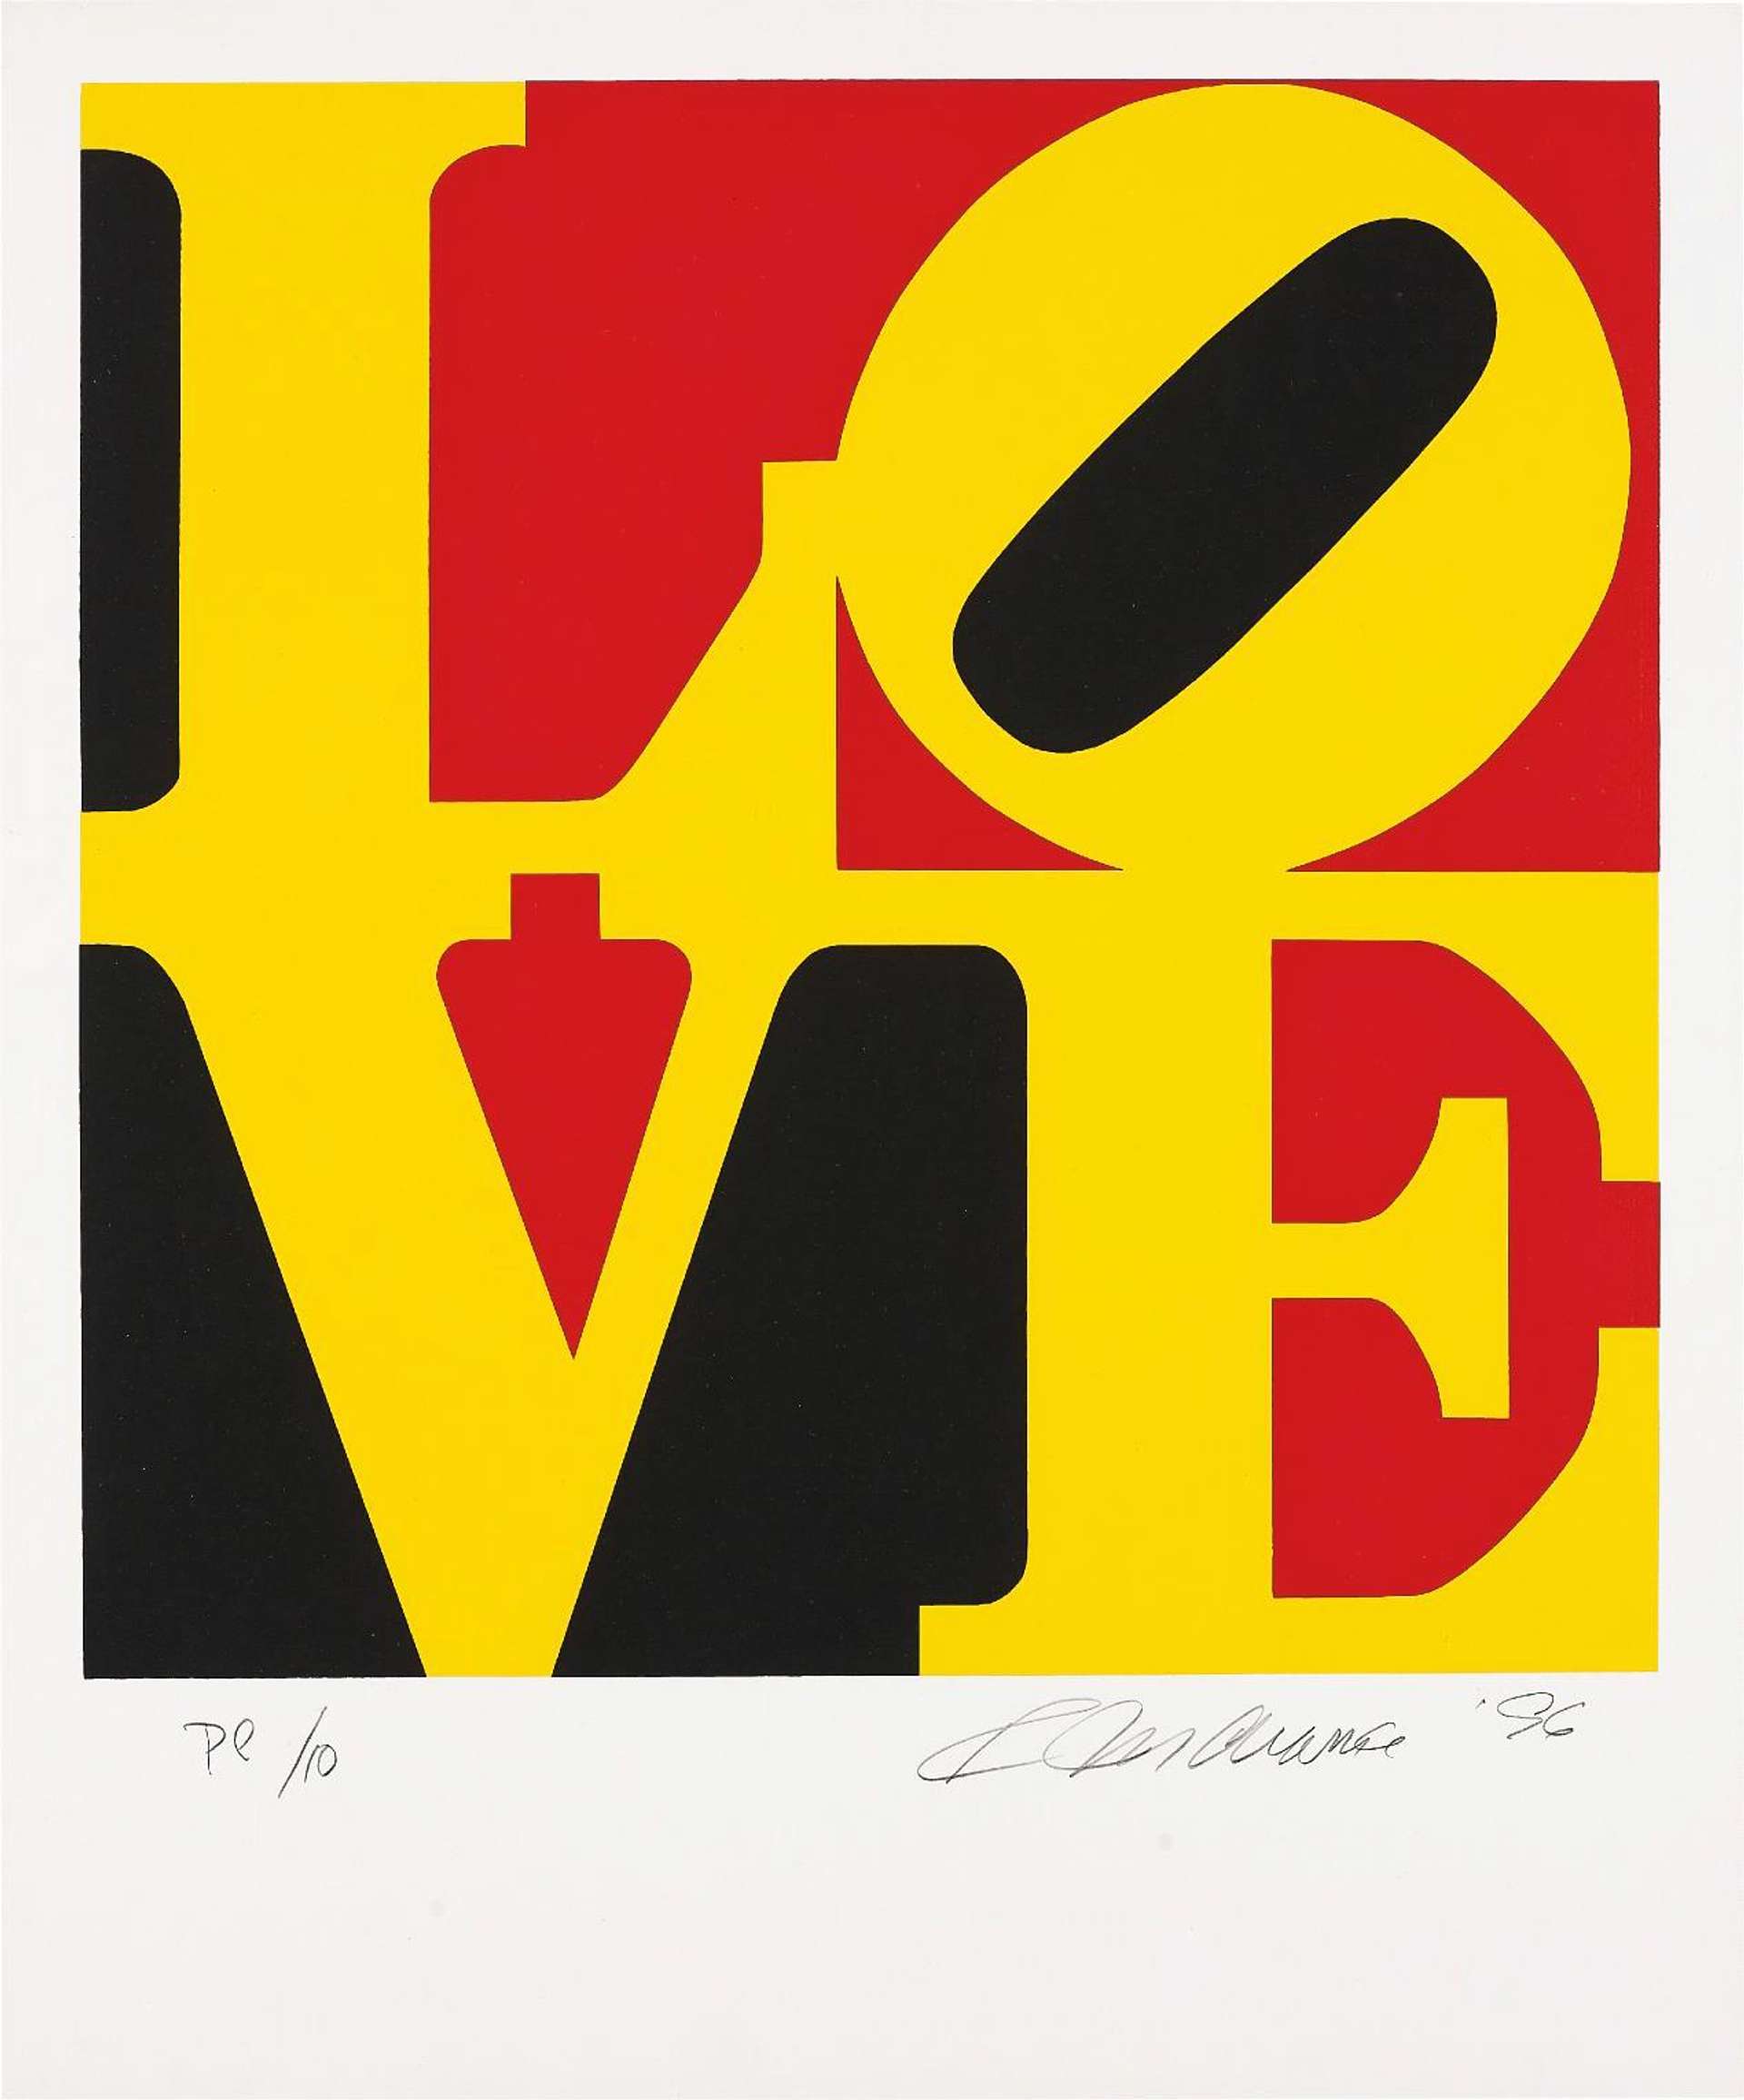 The Book Of Love (yellow, black and red) - Signed Print by Robert Indiana 1996 - MyArtBroker